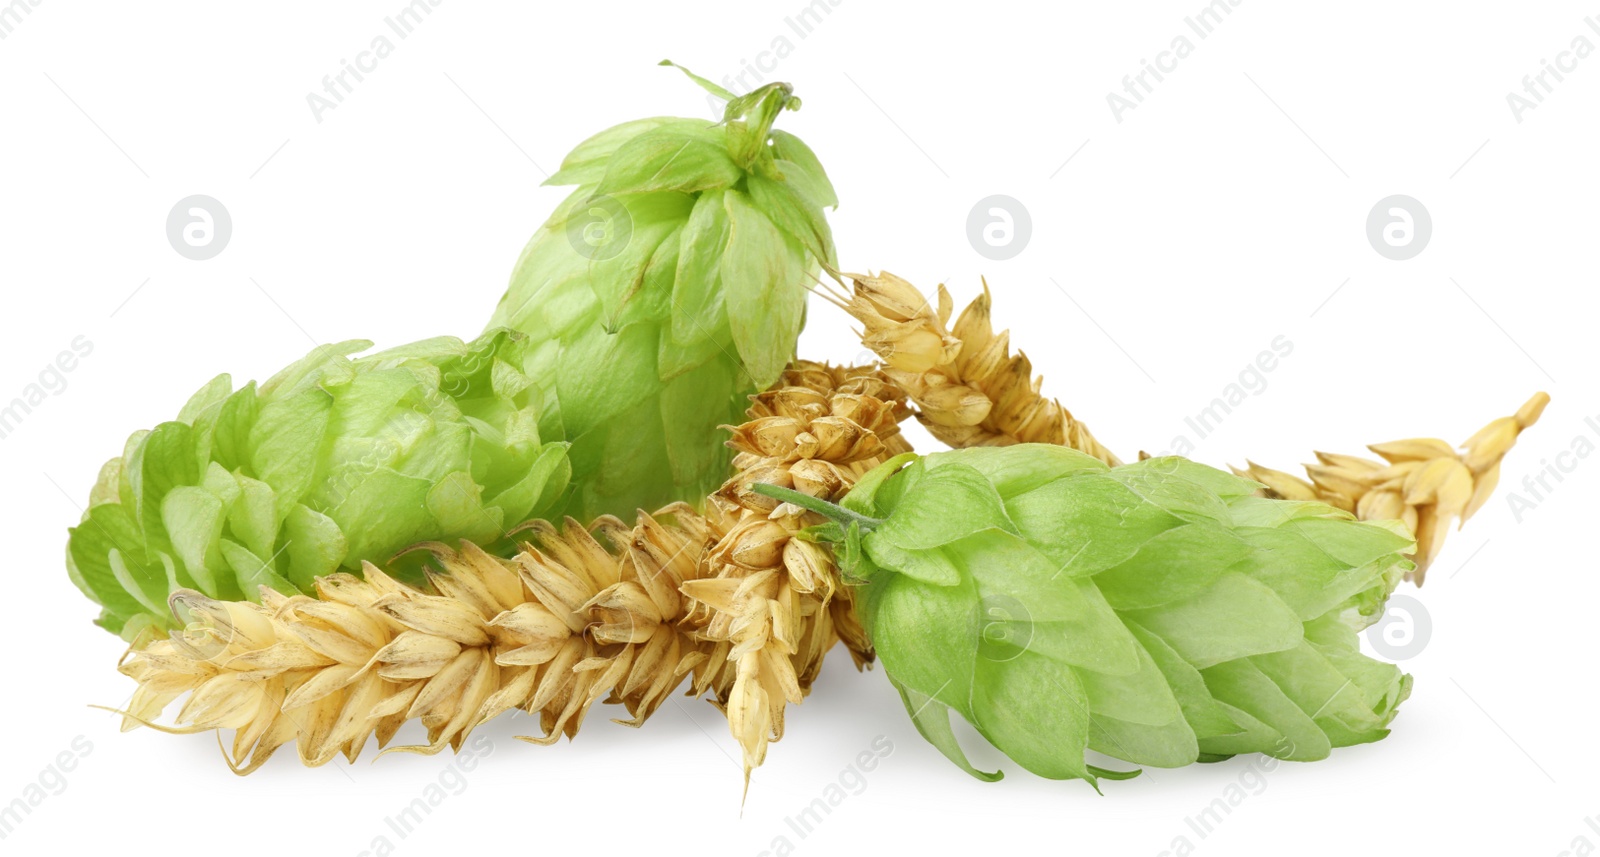 Photo of Fresh green hops and wheat spikes on white background